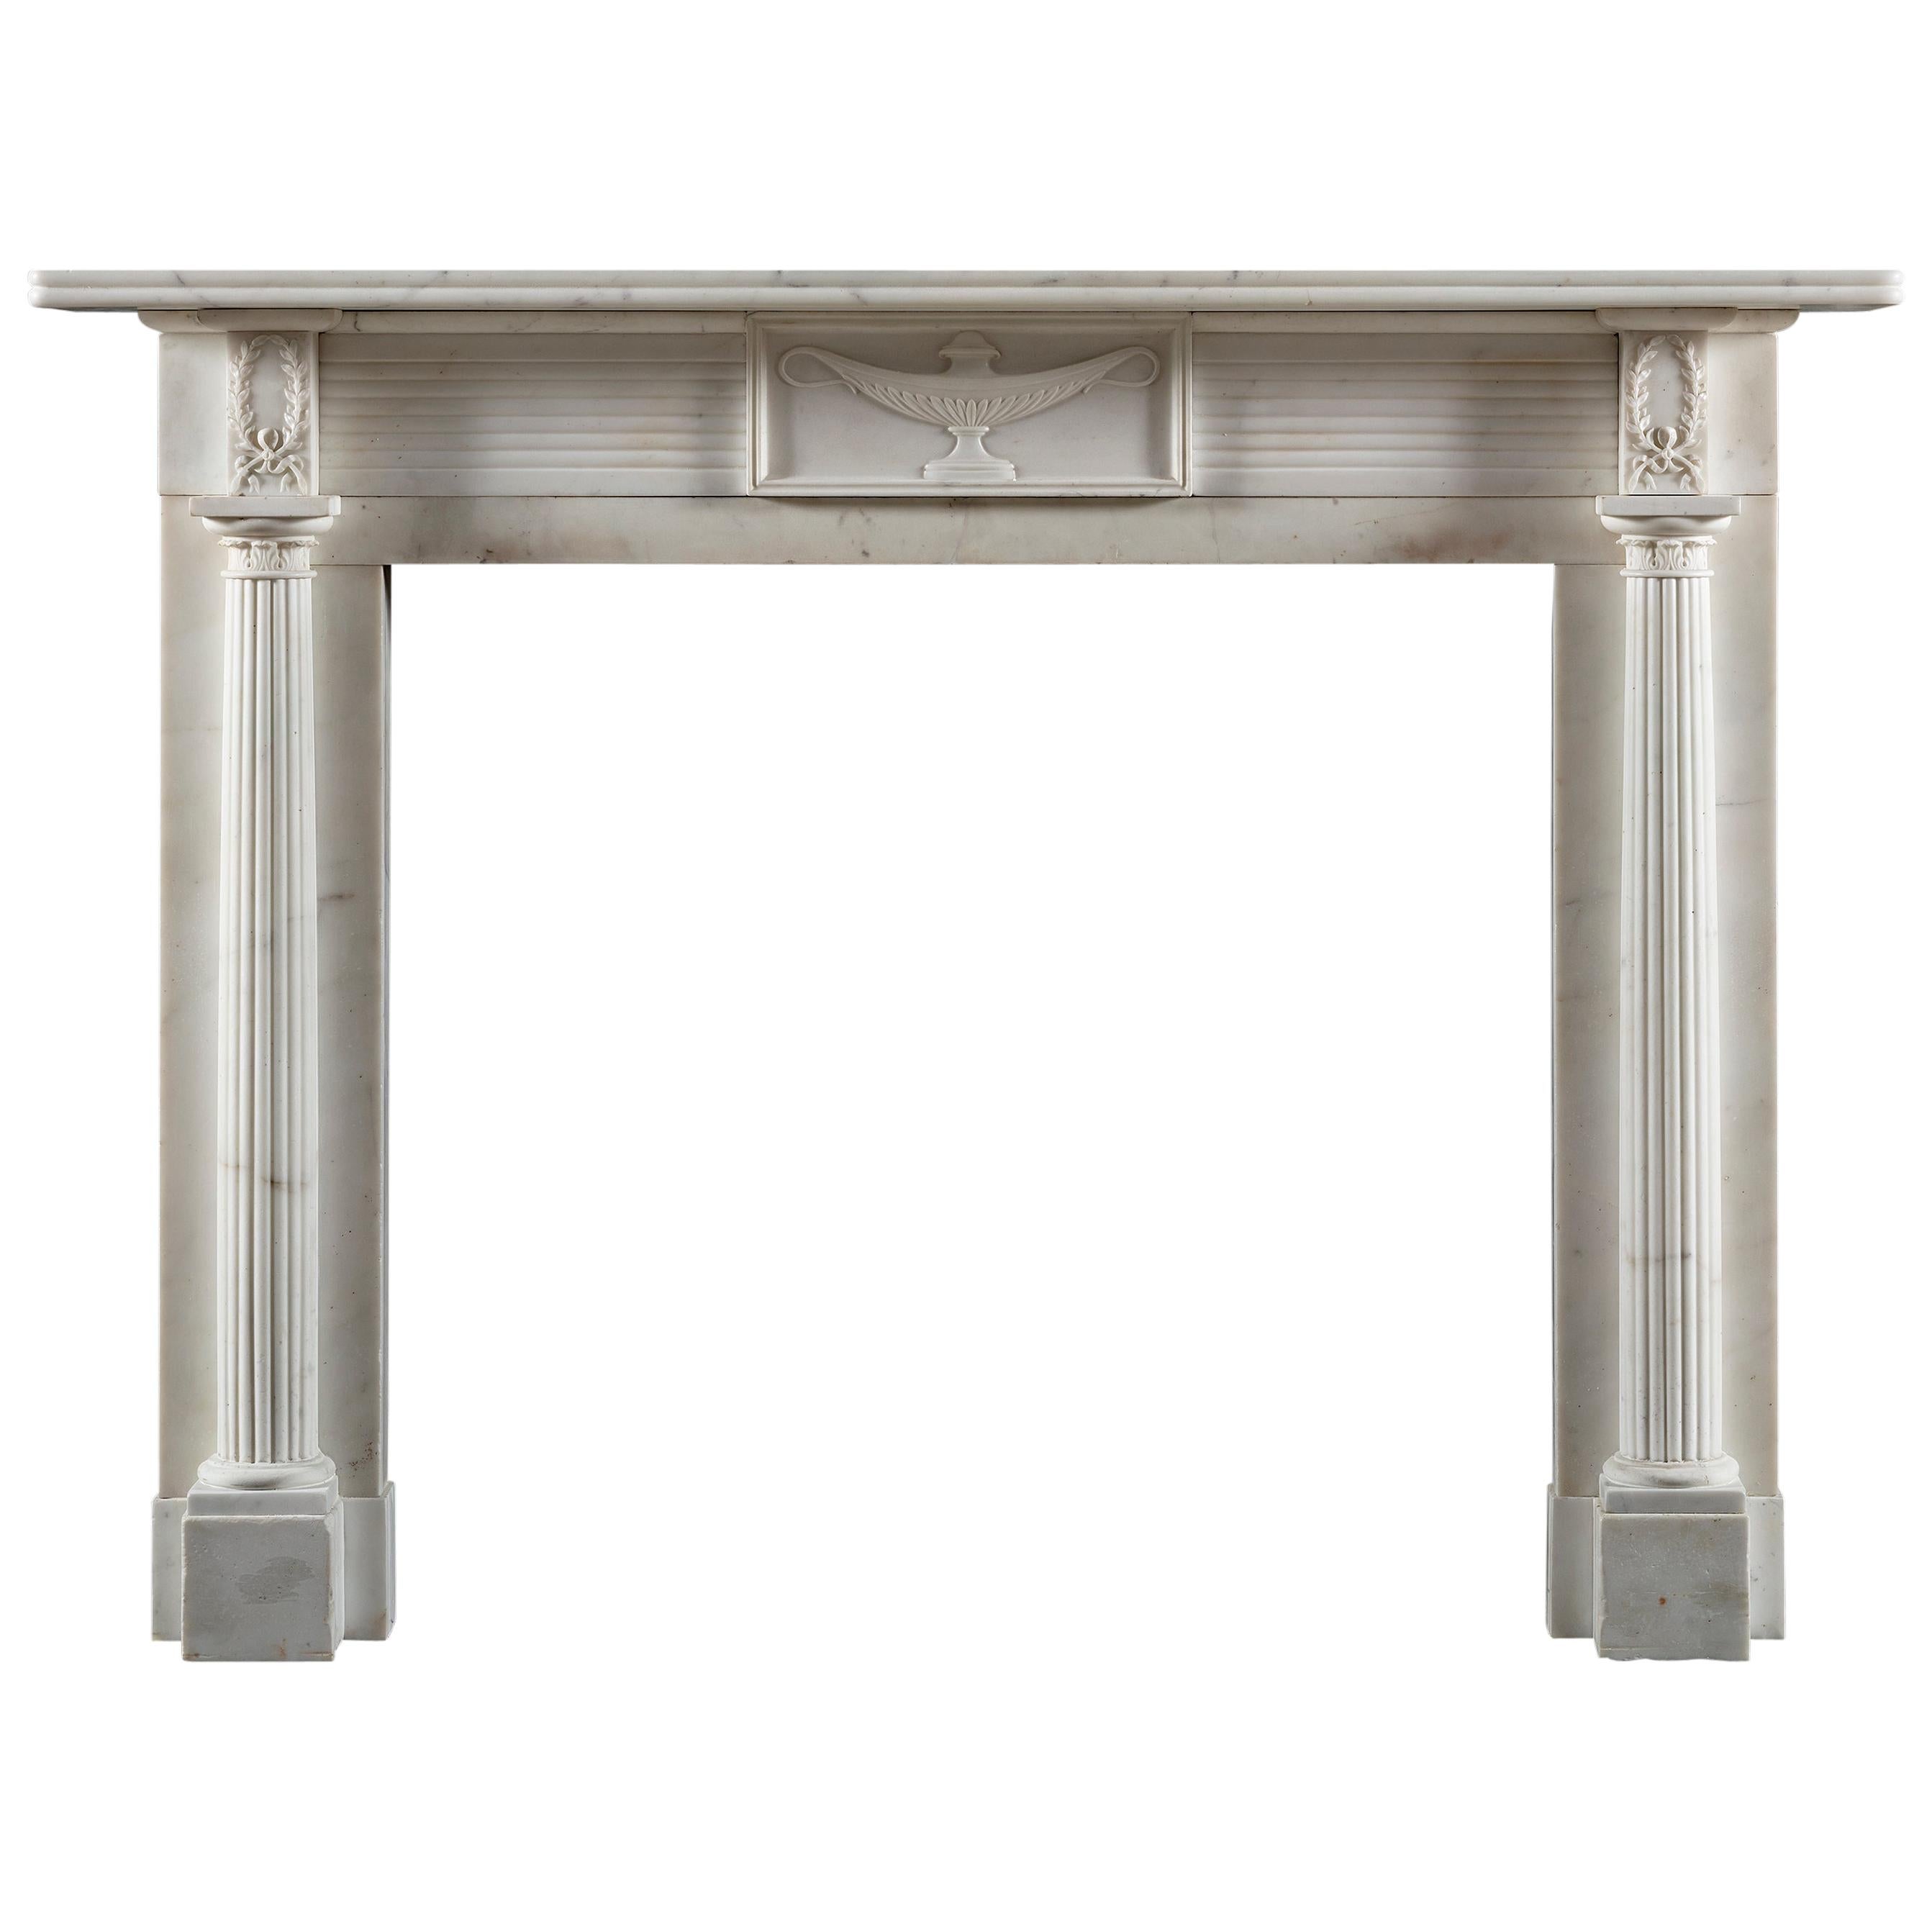 Carved Early 19th Century Regency Period Chimneypiece in Statuary White Marble